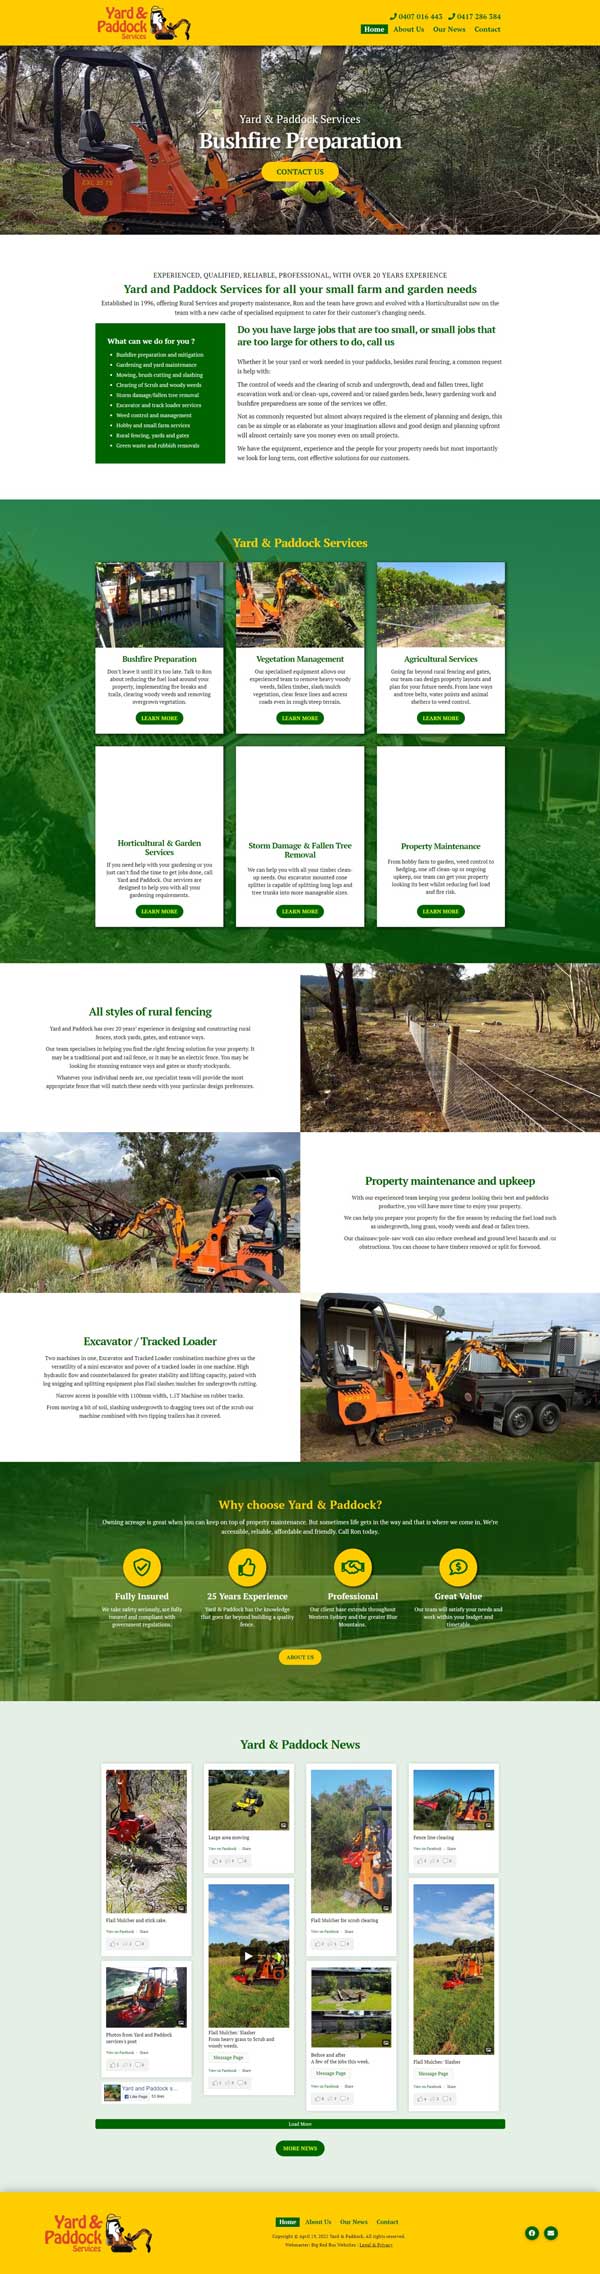 Yard and Paddock Services website designed by Big Red Bus Websites - ezample 1